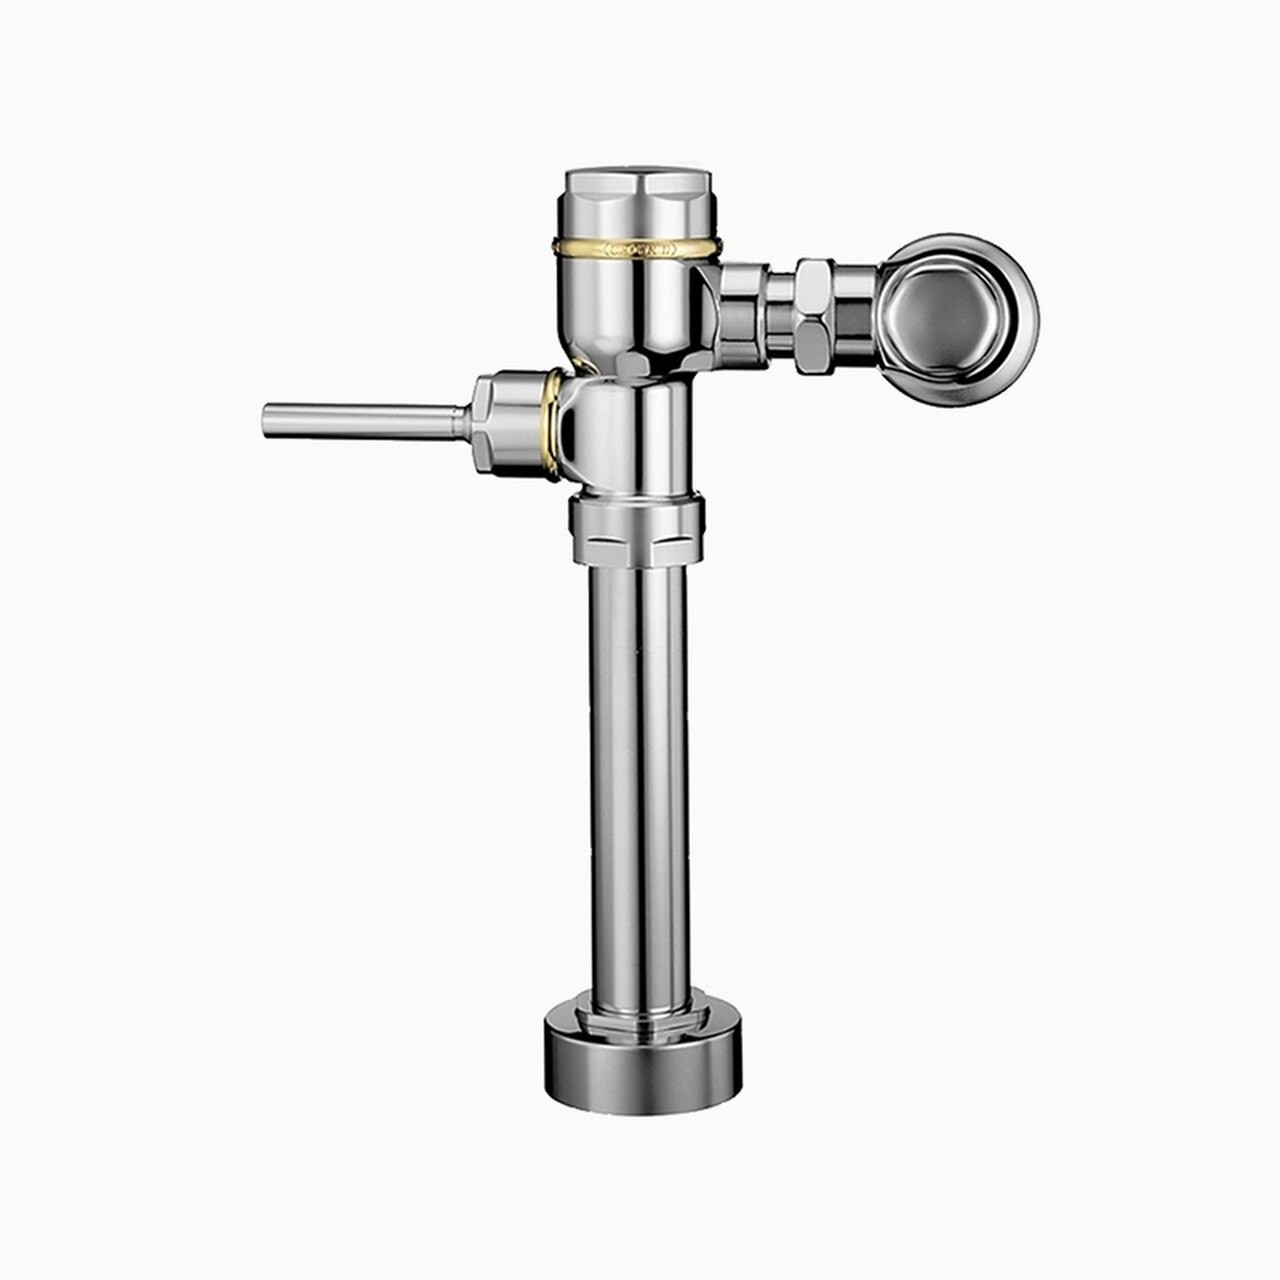 SLOAN 3320004 CROWN II 111 PVDSF 1.6 GPF TOP SPUD SINGLE FLUSH EXPOSED MANUAL WATER CLOSET FLUSHOMETER - BRUSHED STAINLESS